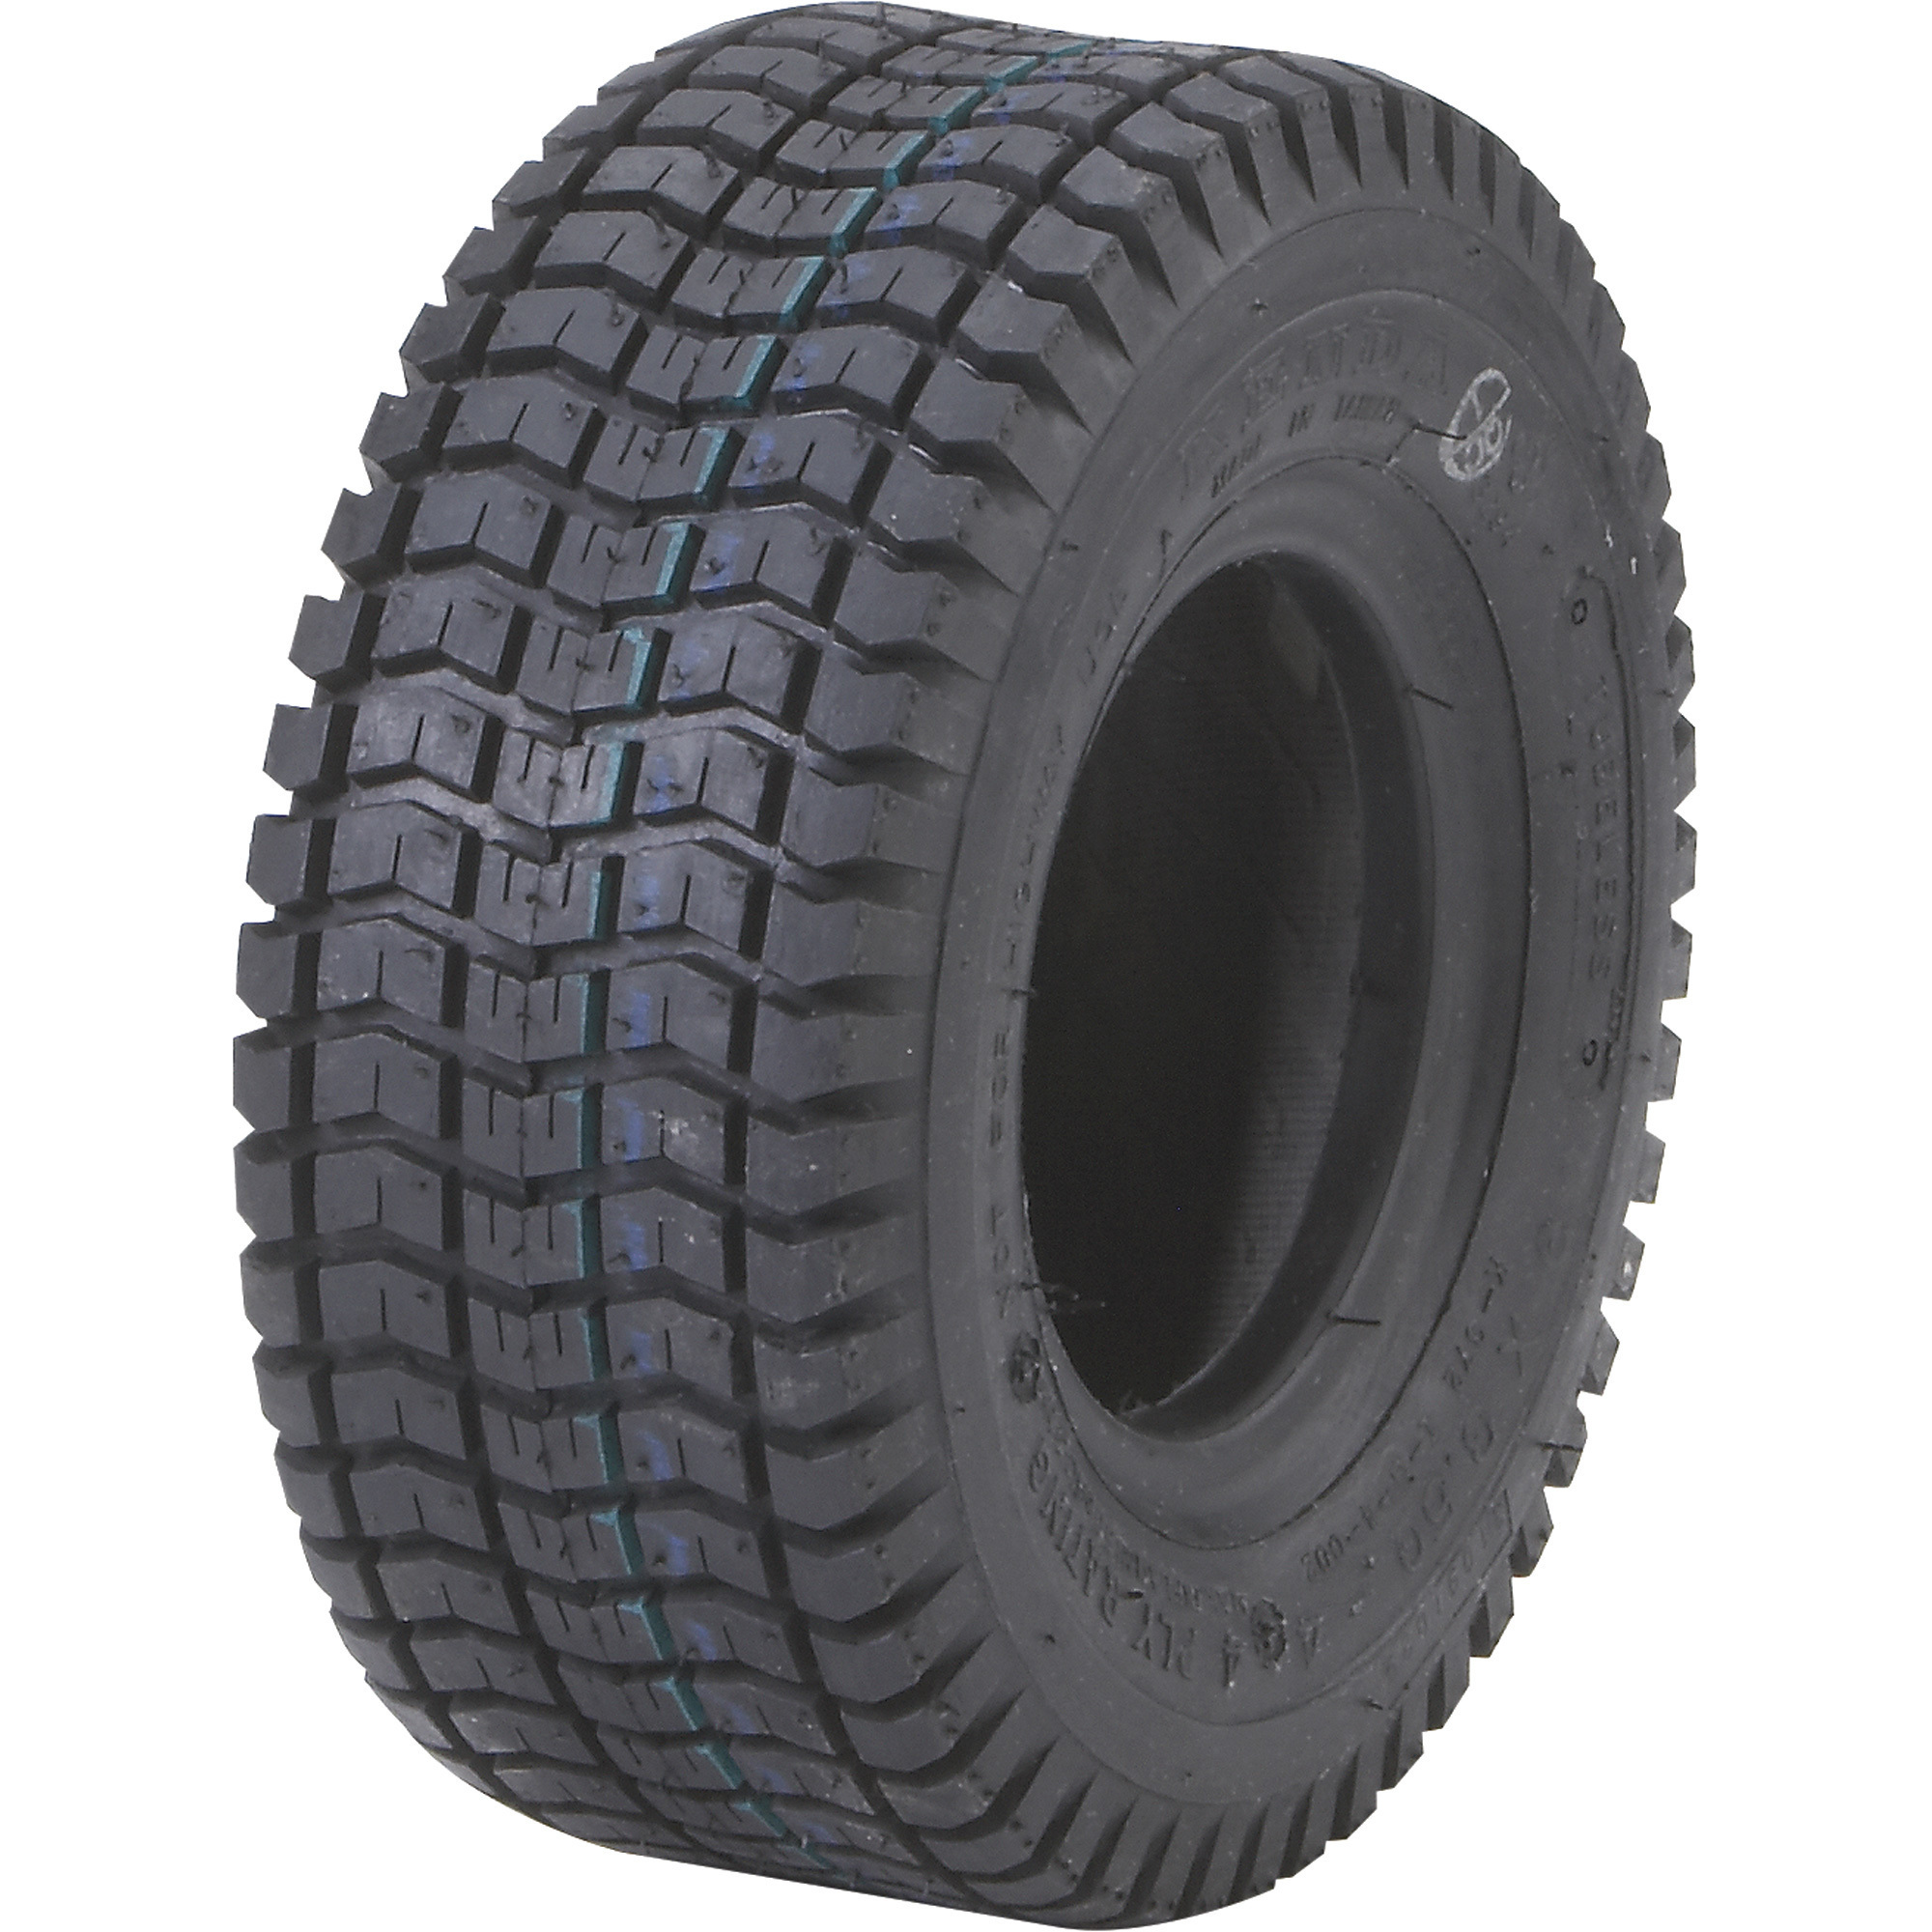 Kenda Turf Max Lawn and Garden Tractor Tubeless Replacement Tire â 9 x 350-4